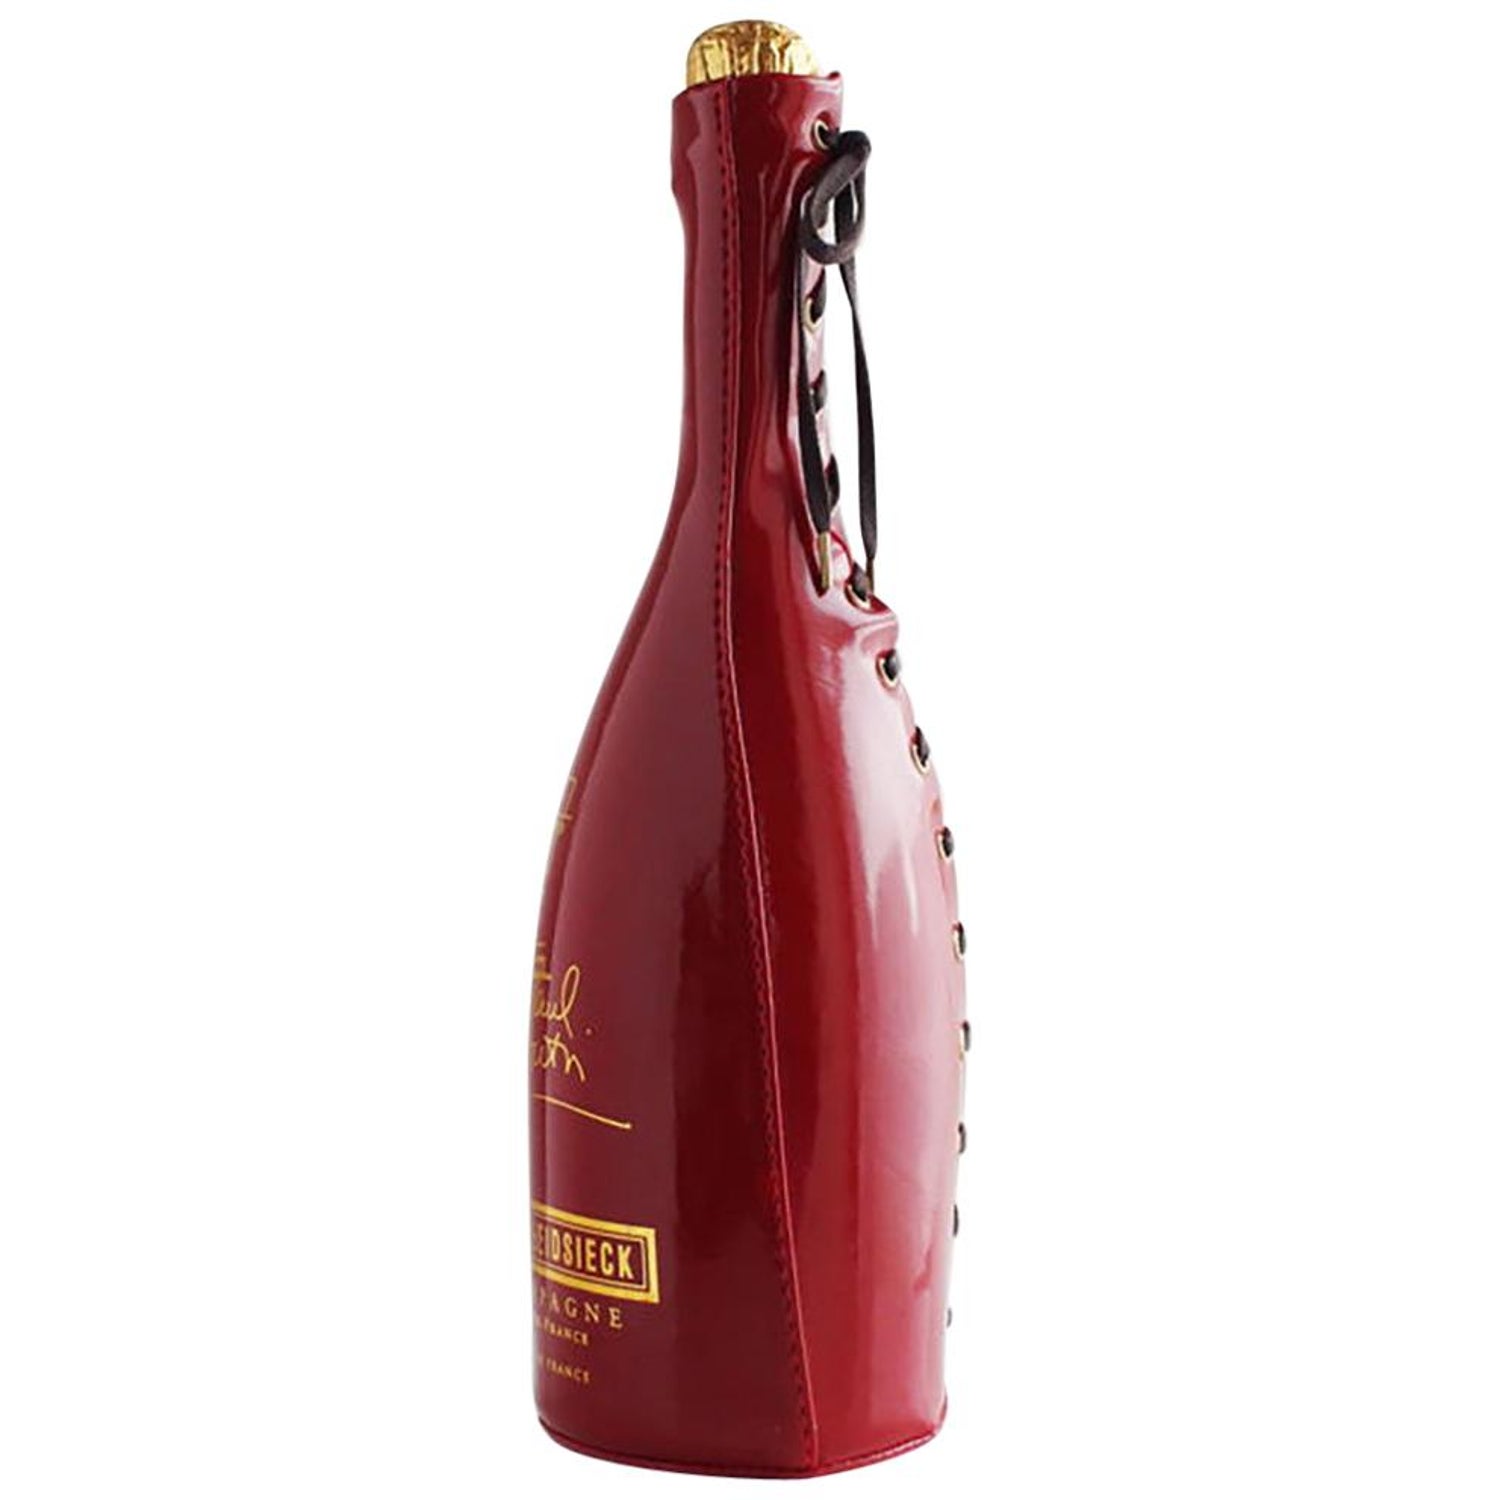 Jean Paul Gaultier Champagne - For Sale on 1stDibs | jean paul gaultier  champagne bottle, champagne jean paul gaultier, piper heidsieck jean paul  gaultier